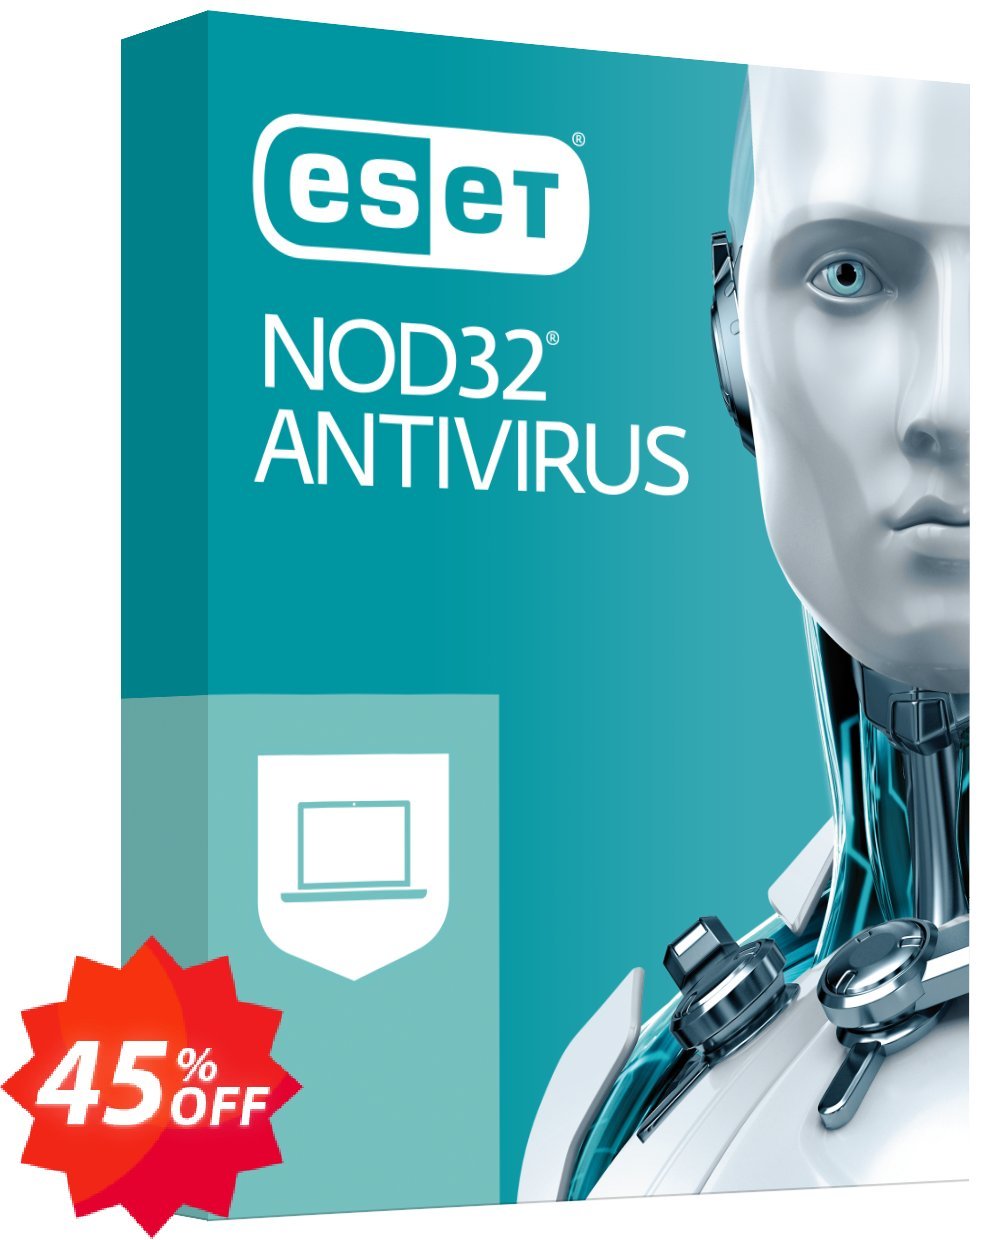 ESET NOD32 Antivirus -  2 Years 4 Devices Coupon code 45% discount 